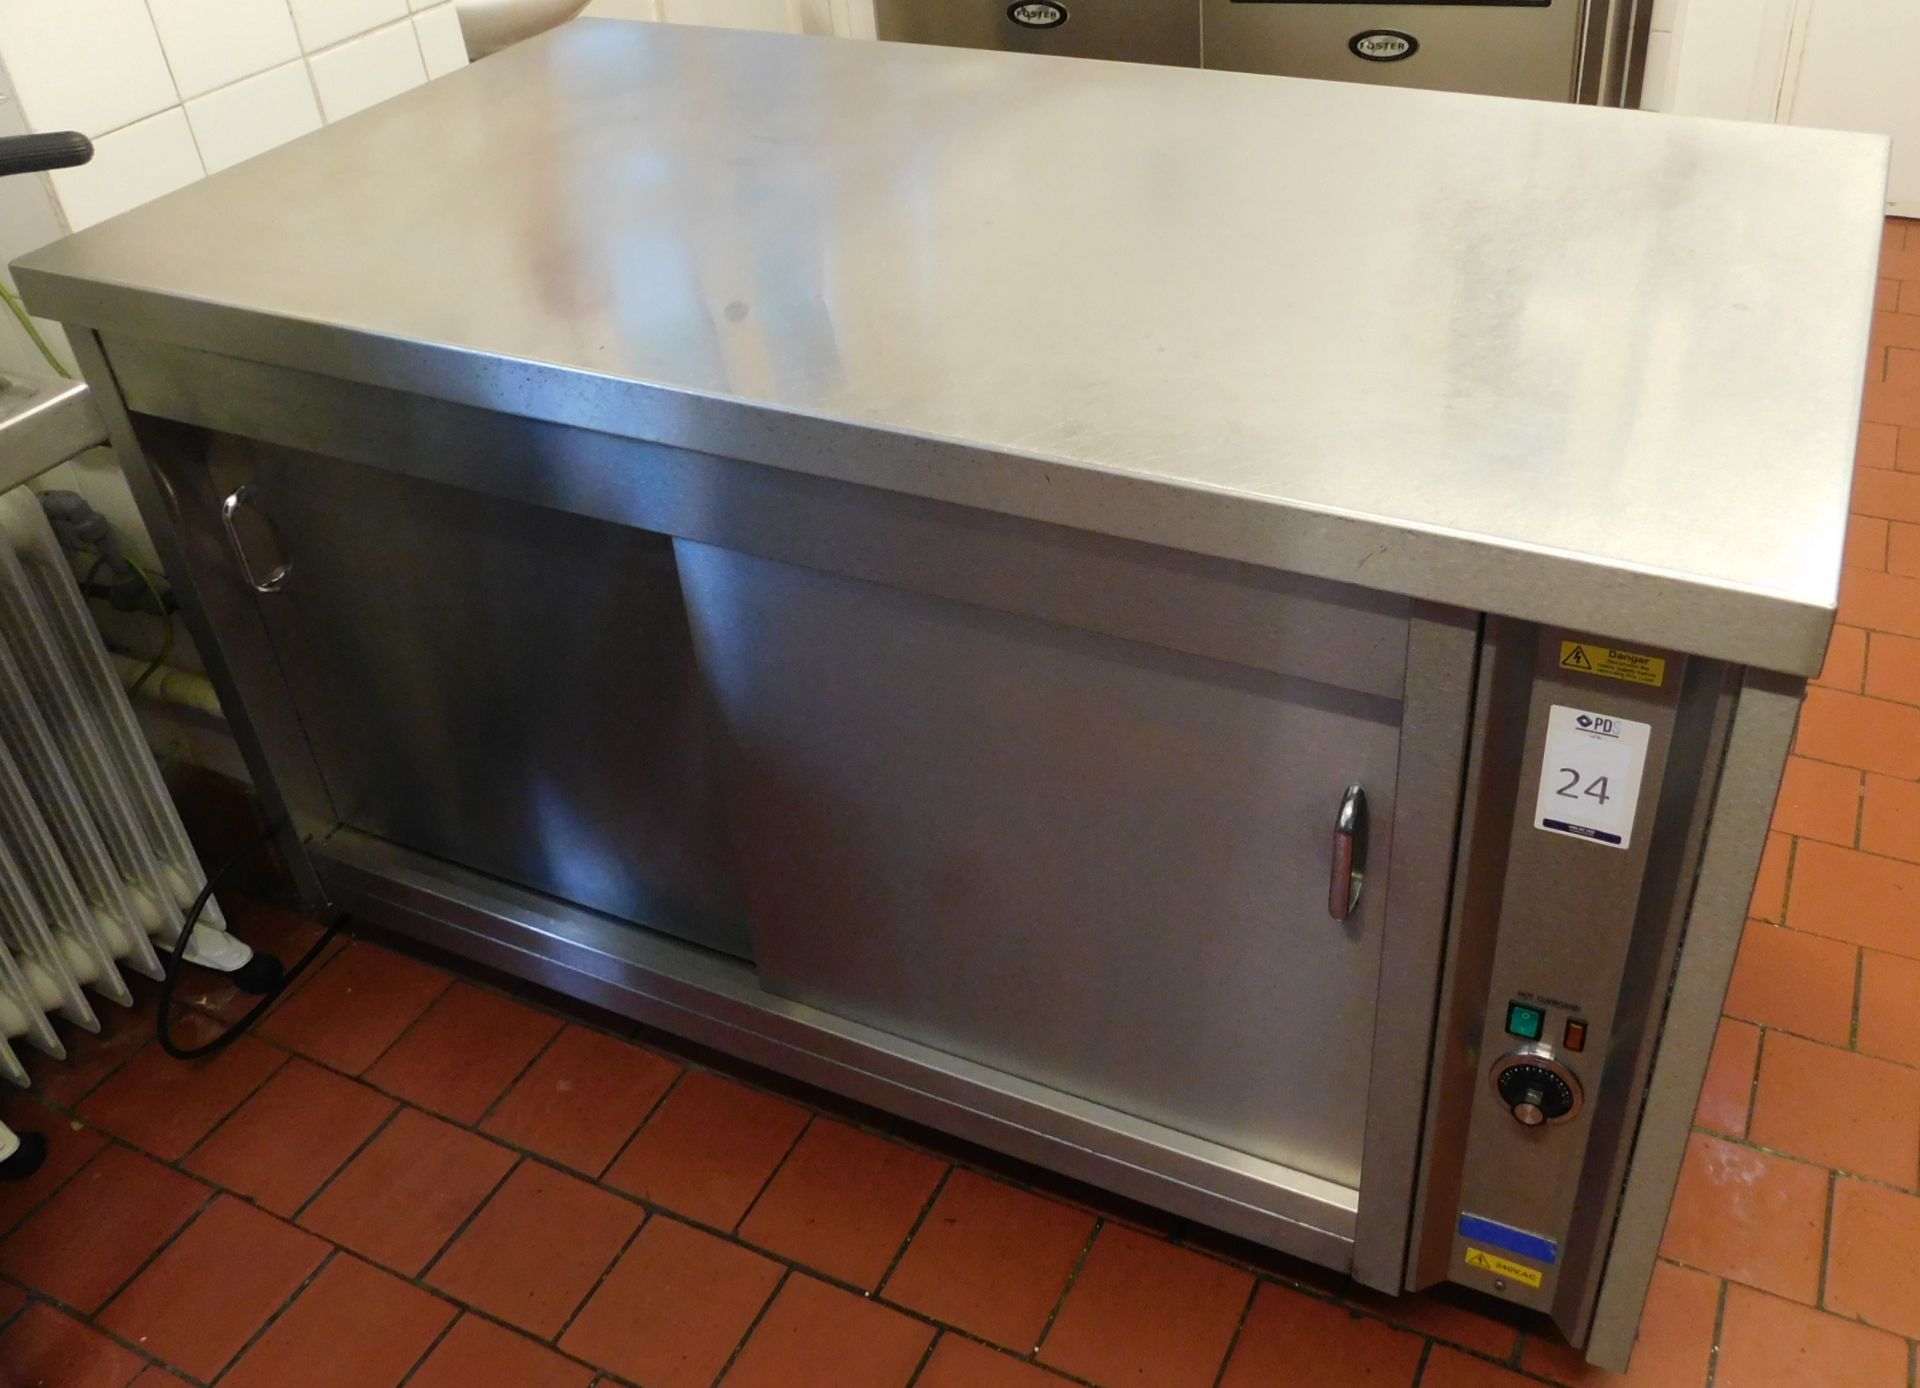 CED HC Stainless Steel Hot Cabinet, Serial Number 59832 (Location Bloomsbury - See General Notes for